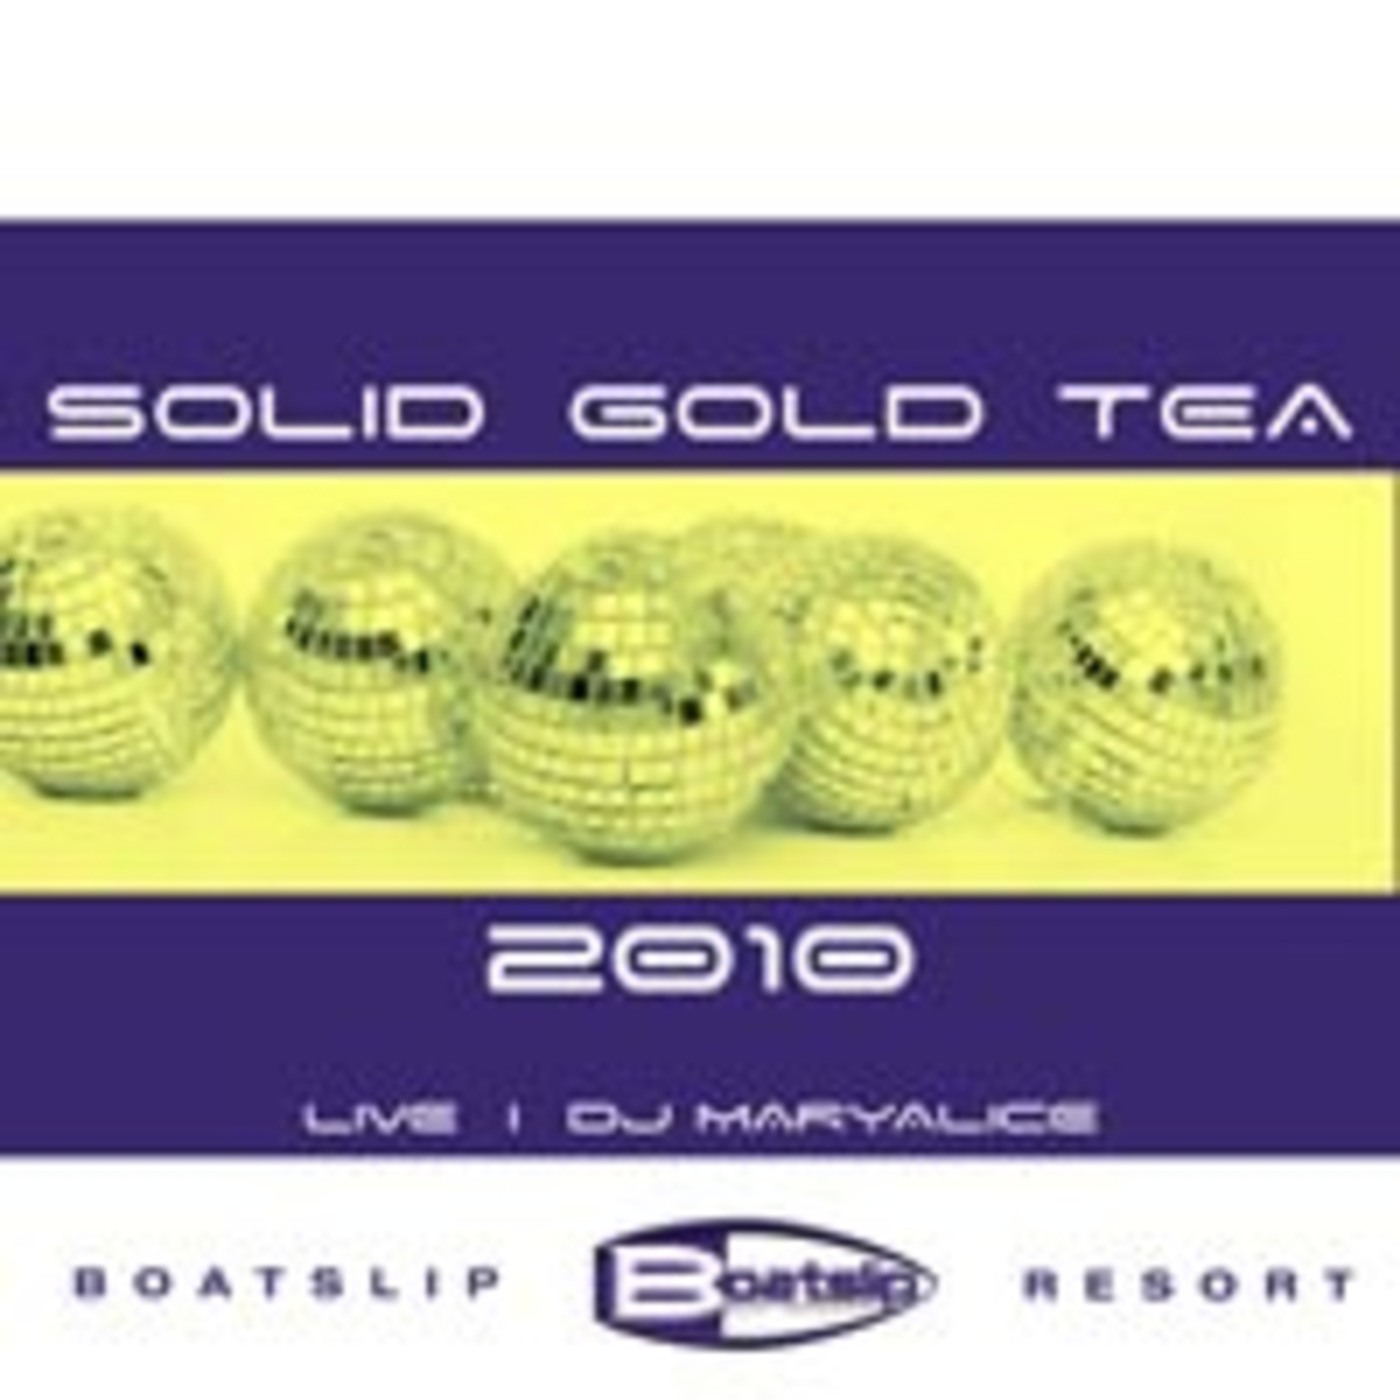 Live at the Boatslip Resort : Solid Gold 2010 Part 1